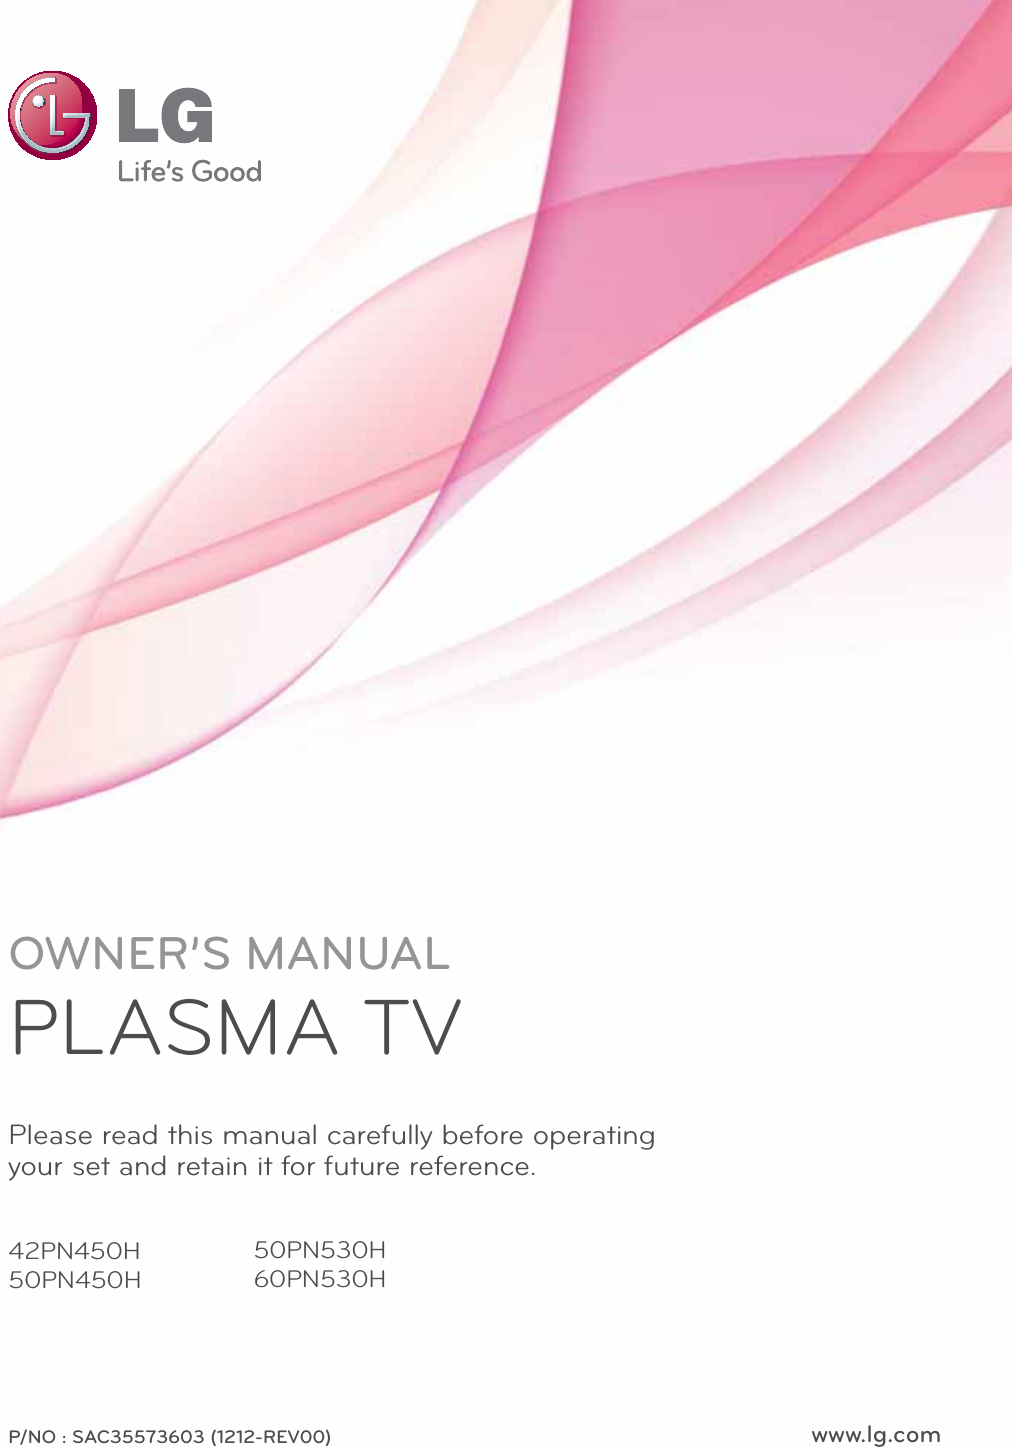 www.lg.comOWNER’S MANUALPLASMA TVPlease read this manual carefully before operating your set and retain it for future reference.42PN450H50PN450H50PN530H60PN530HP/NO : SAC35573603 (1212-REV00)